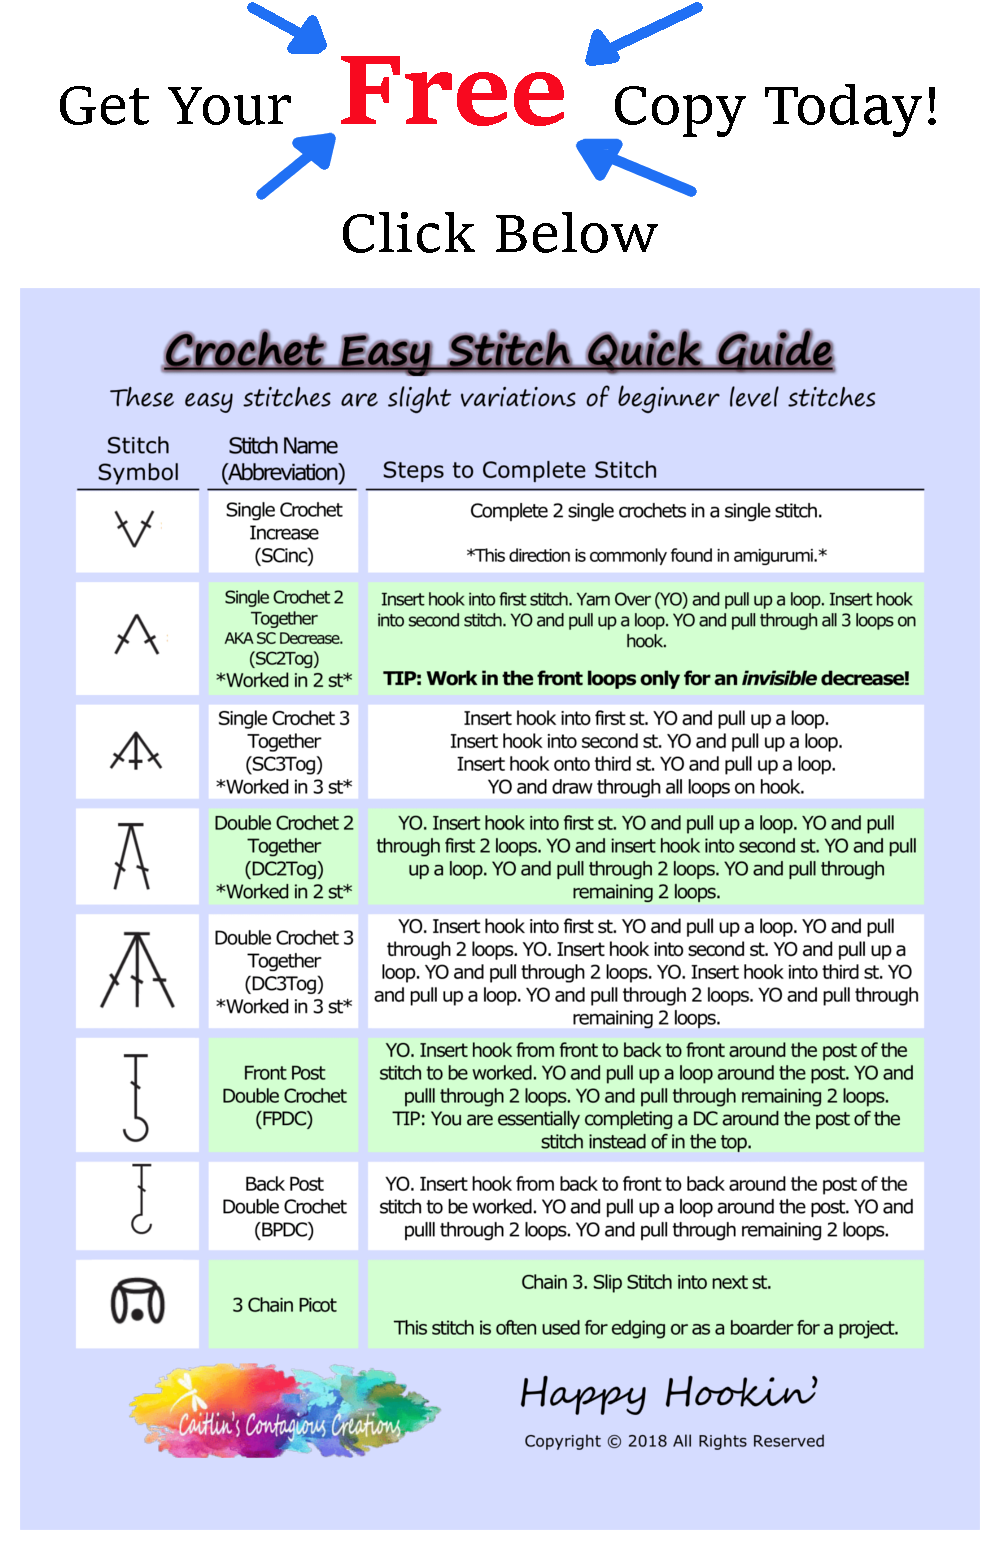 Easy Crochet Stitch Quick Guide Caitlin s Contagious Creations